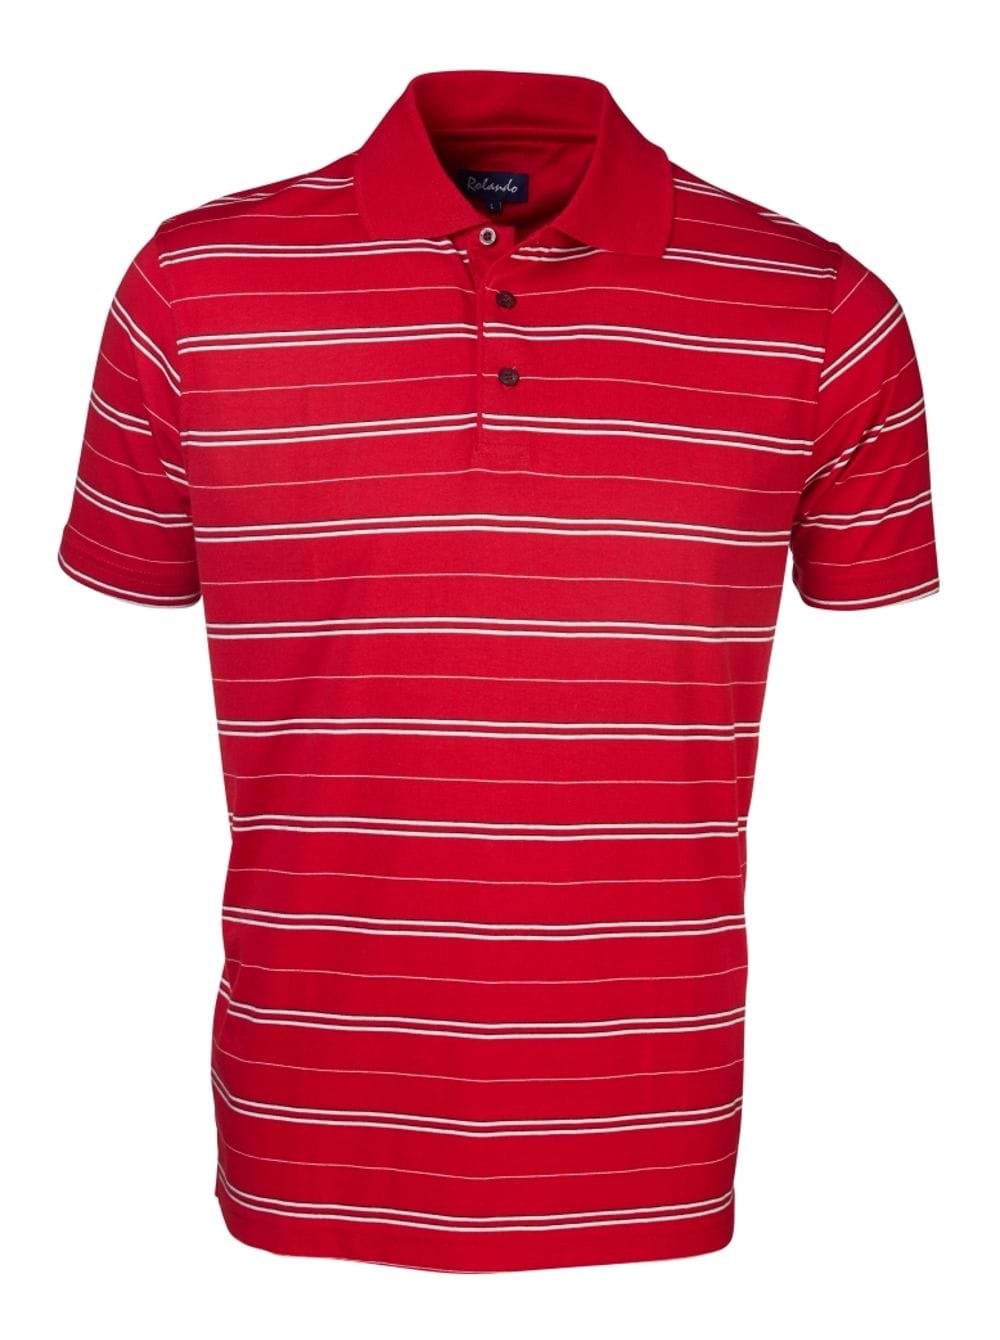 Mens Cotswold Golfer - Red/White/Black